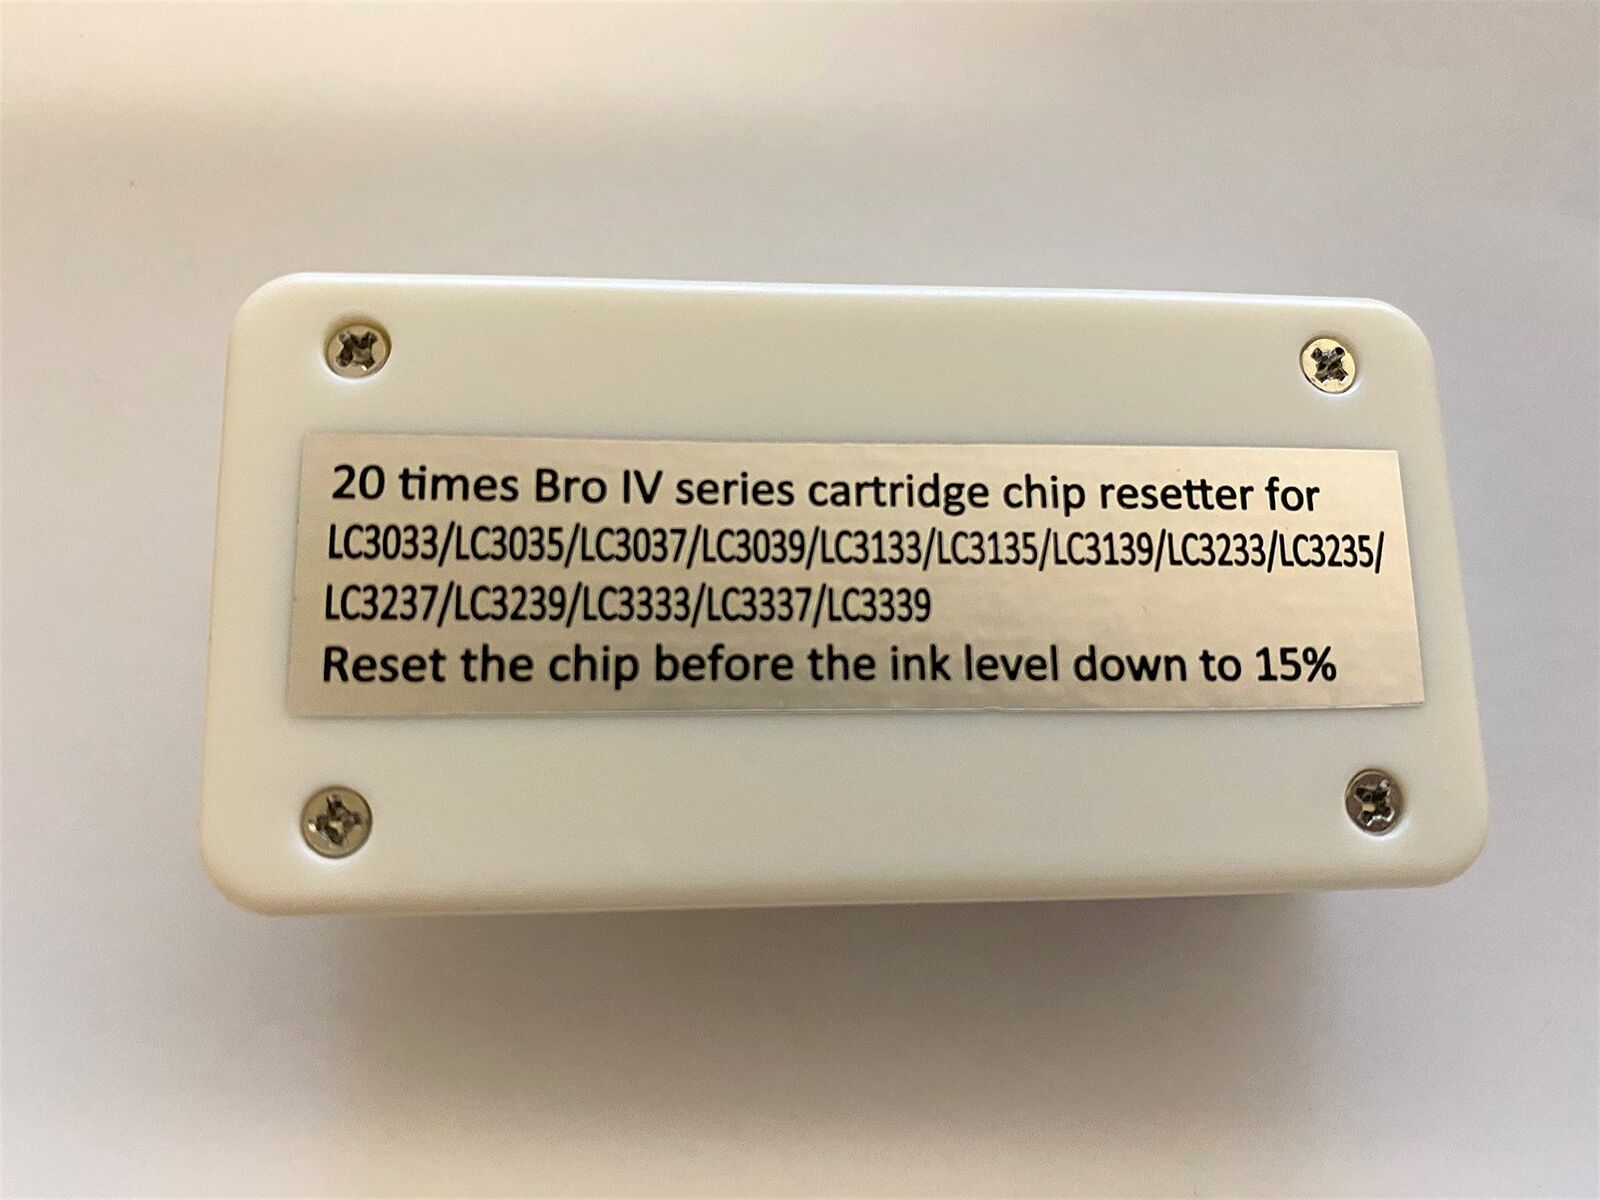 Chip Resetter for Brother LC Series - Extends Cartridge Life and Saves Money